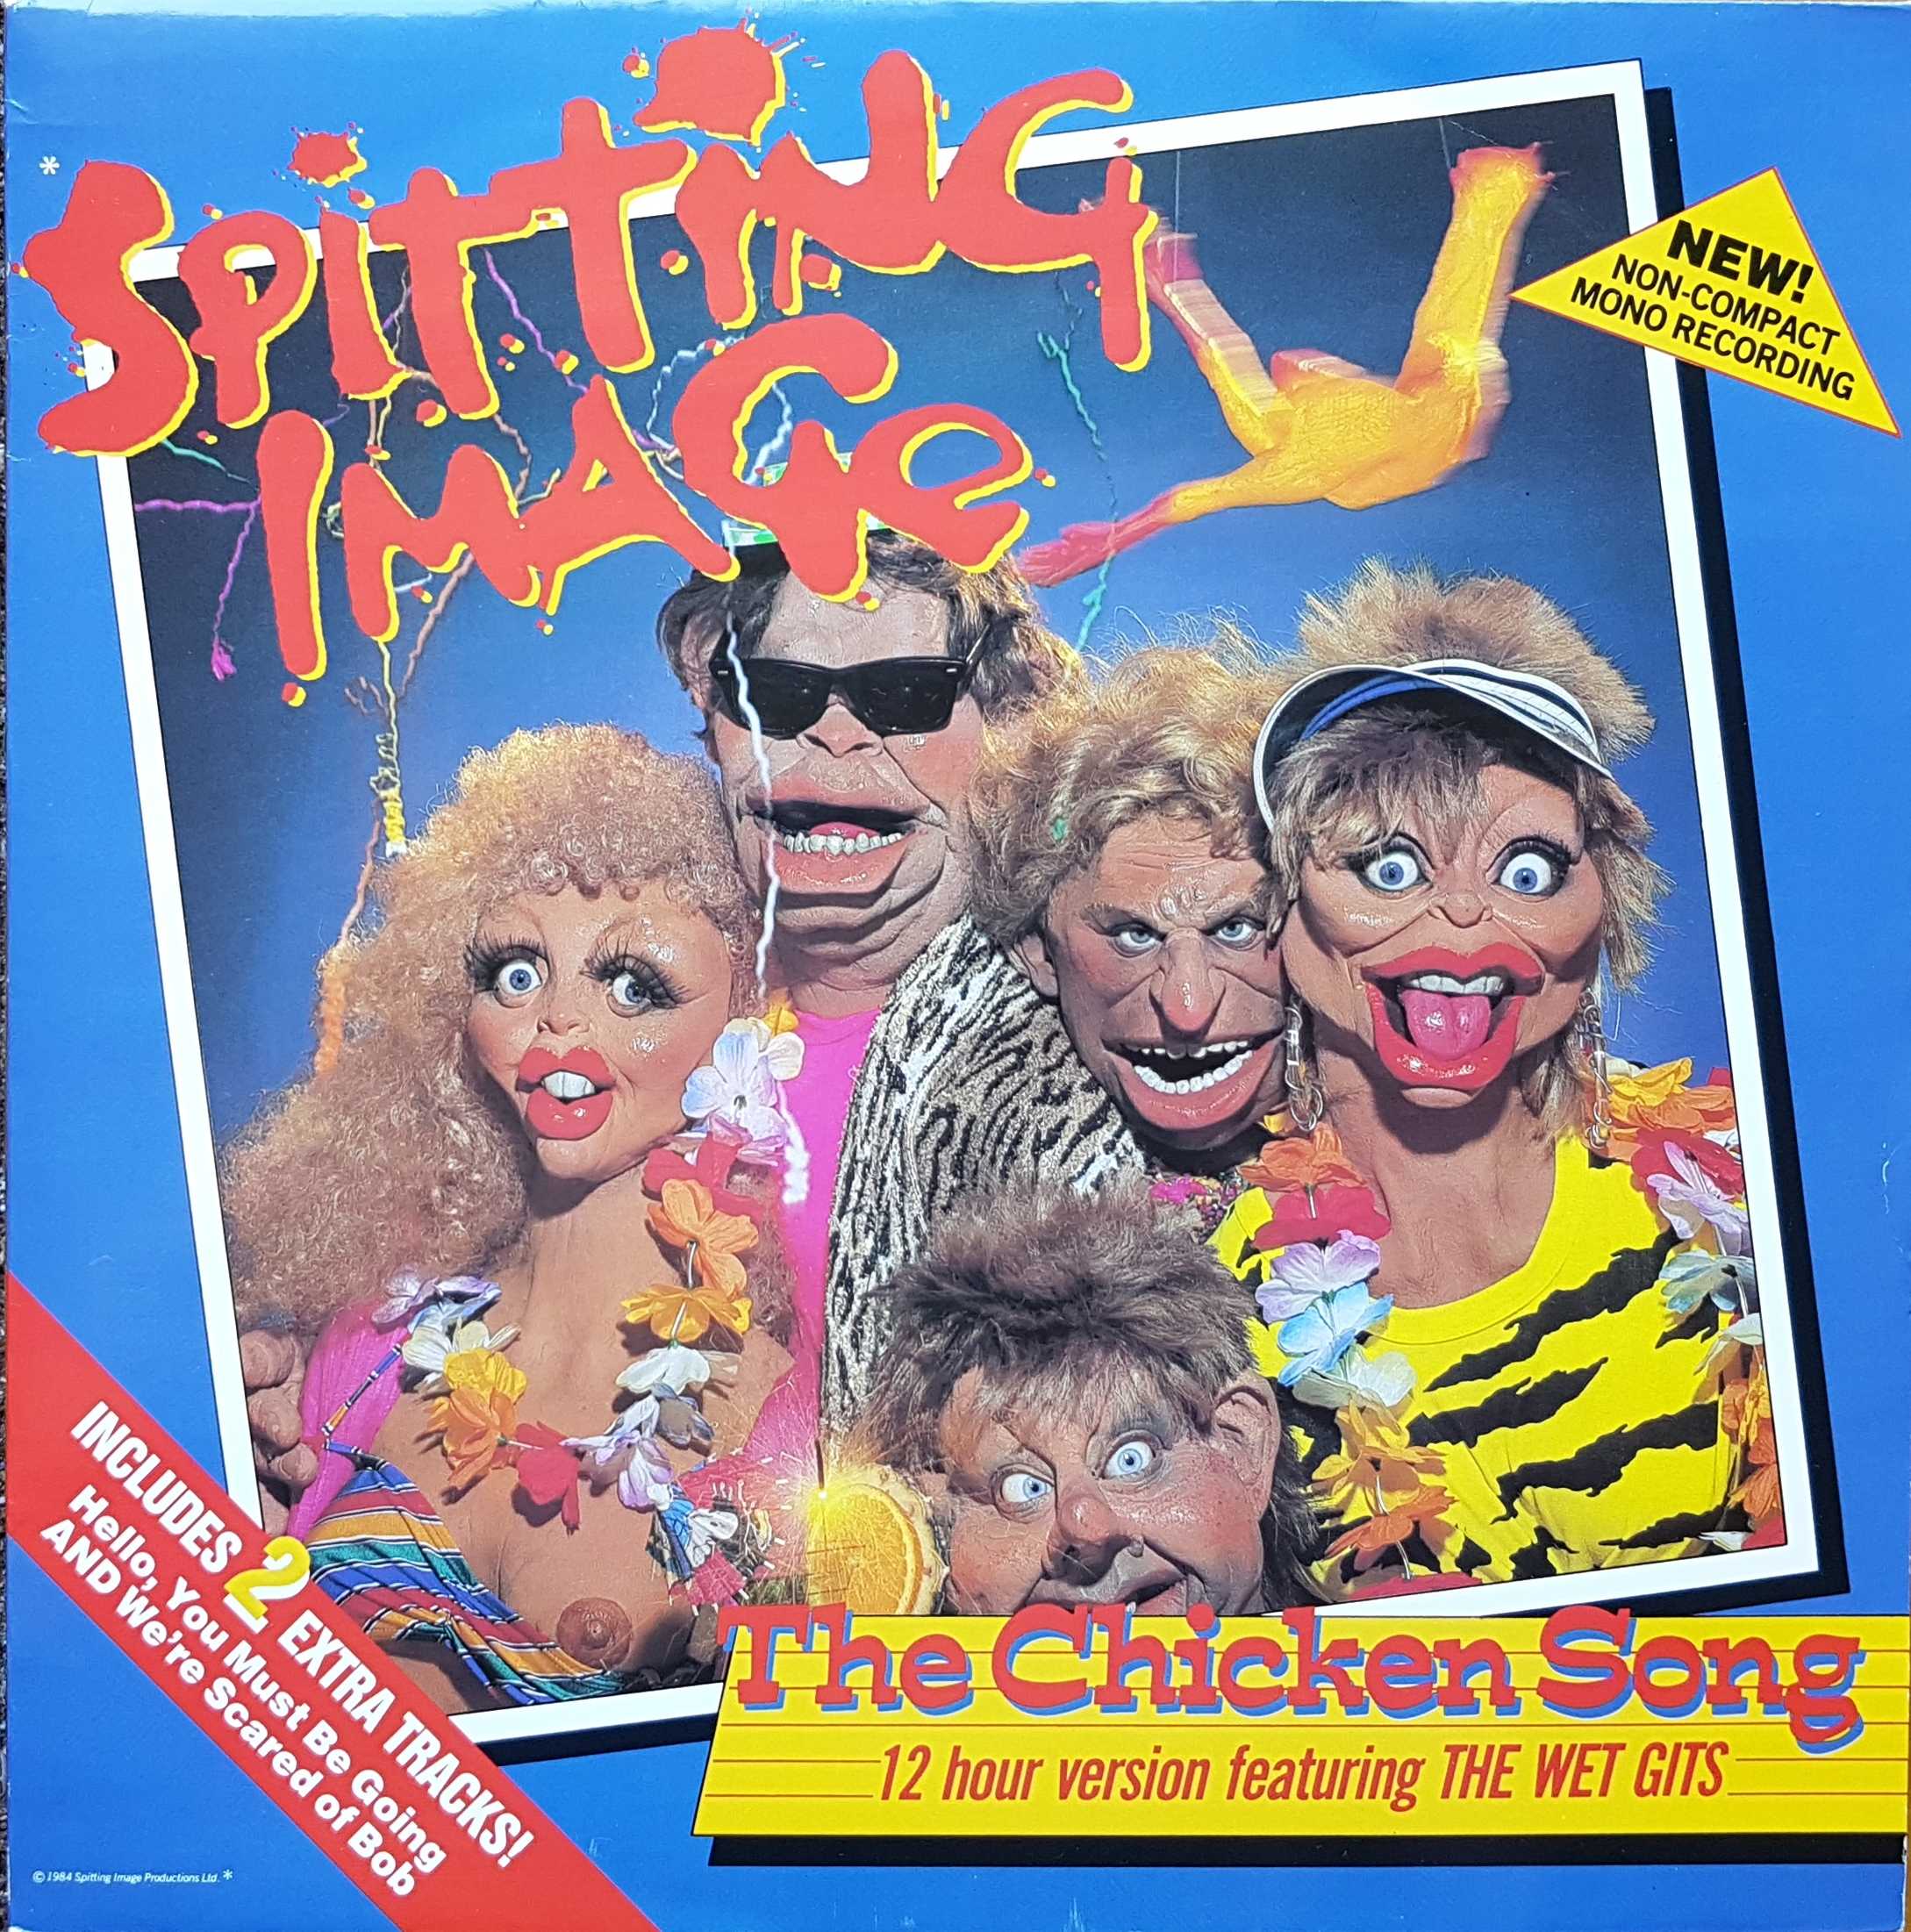 Picture of The chicken song (Spitting image) by artist Pope / Grant / Naylor from ITV, Channel 4 and Channel 5 12inches library